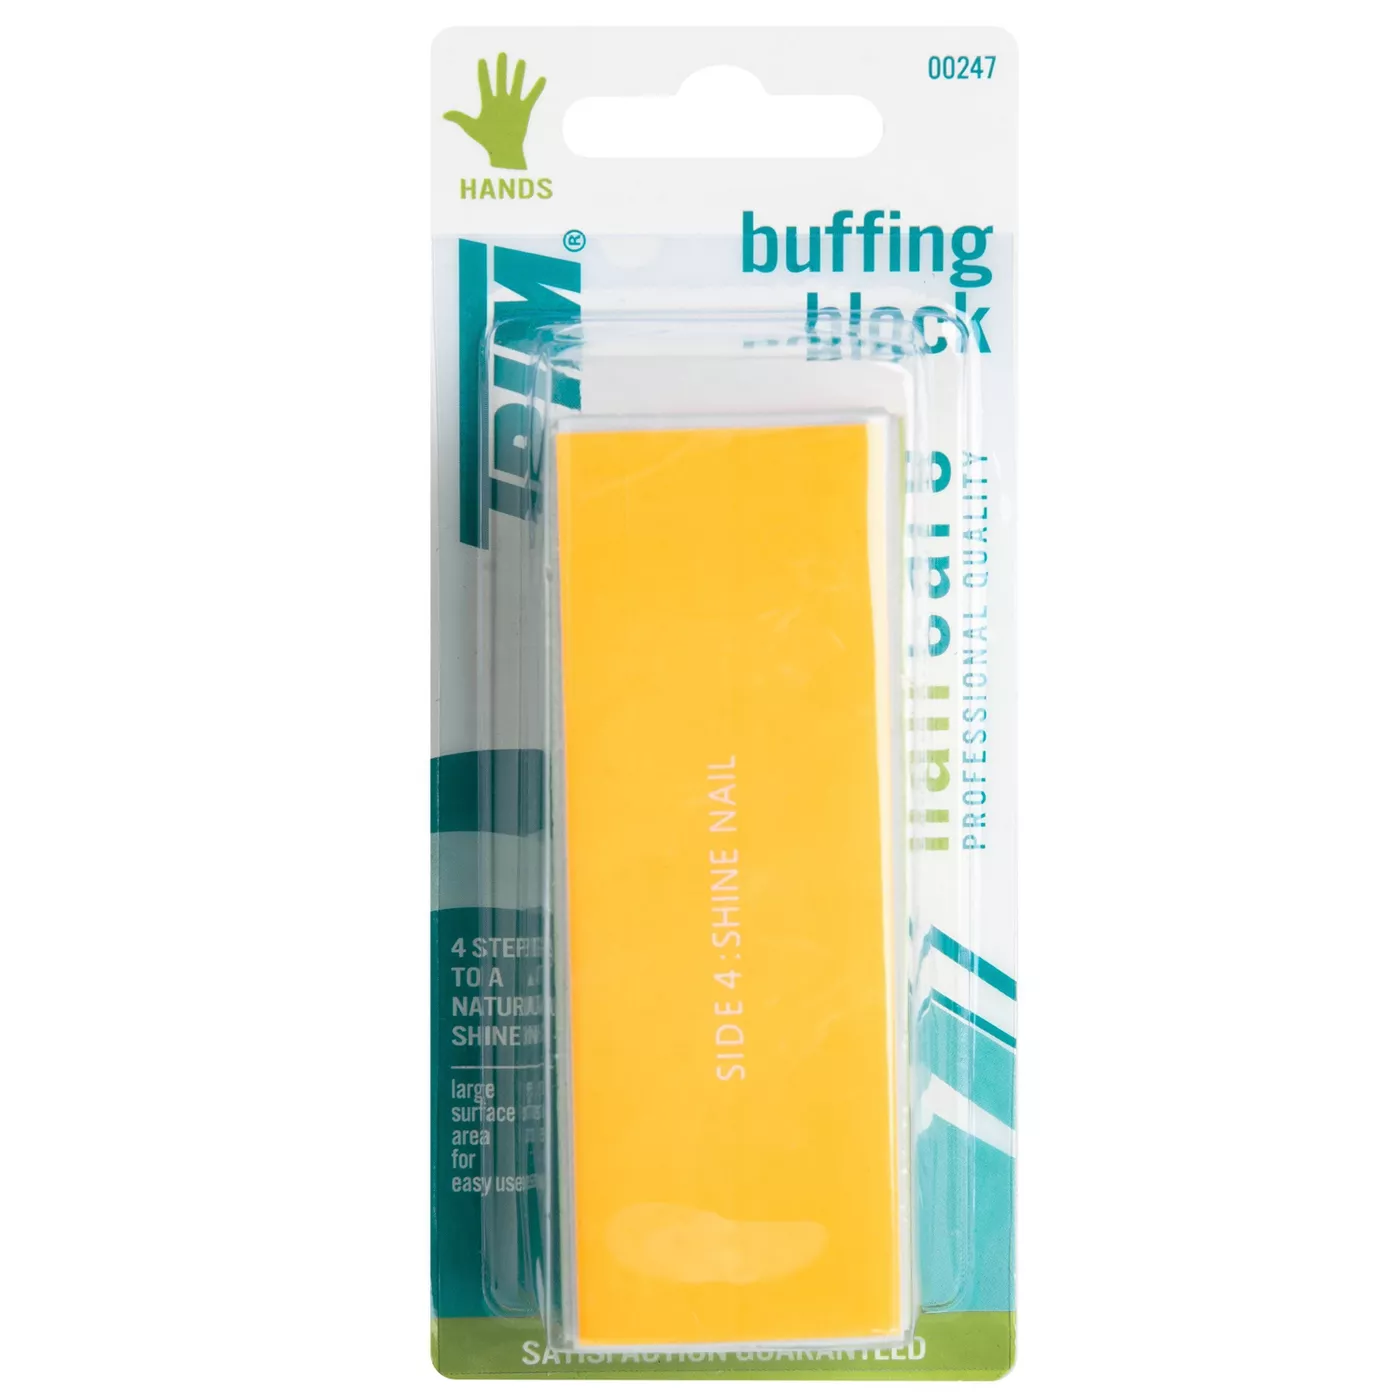 Buffing block to create smooth, shiny, nails and to give yourself an at home manicure